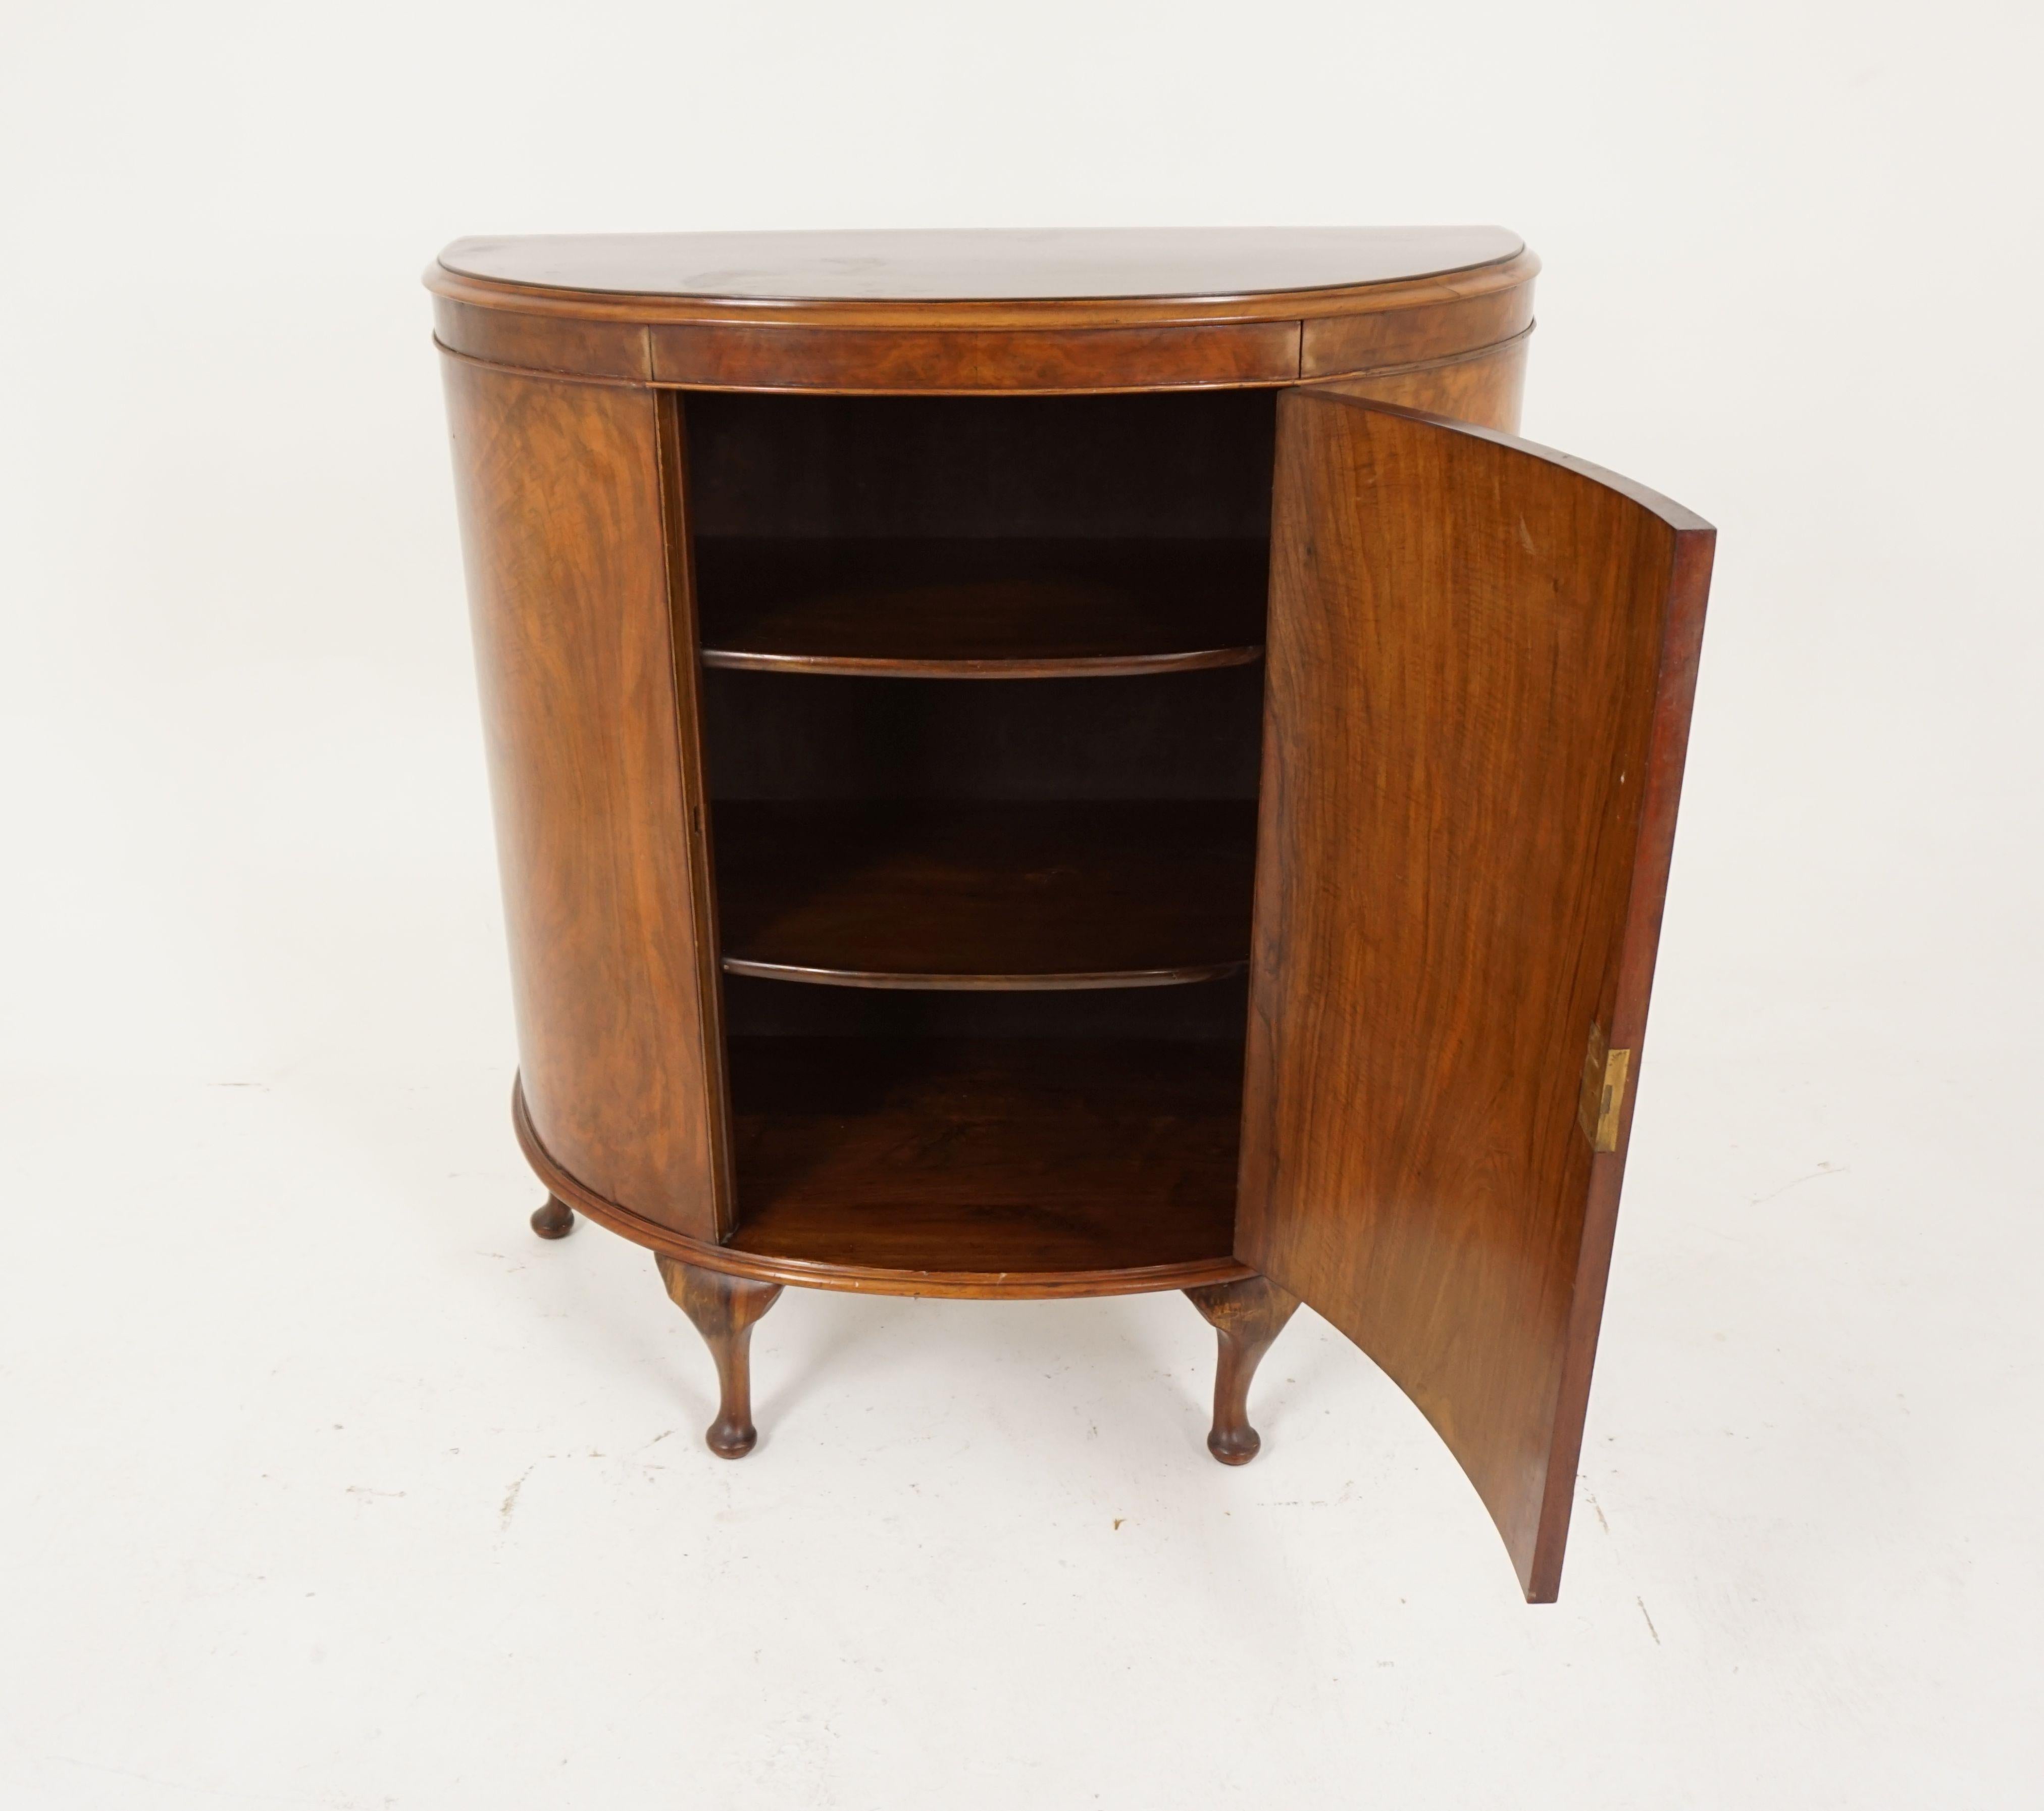 Early 20th century antique walnut demilune drink cabinet, bar cabinet, Scotland 1930, B1954

Scotland, 1930
Solid walnut and veneer
Original finish
Solid walnut top with moulded edge
One central door below which opens to reveal a single